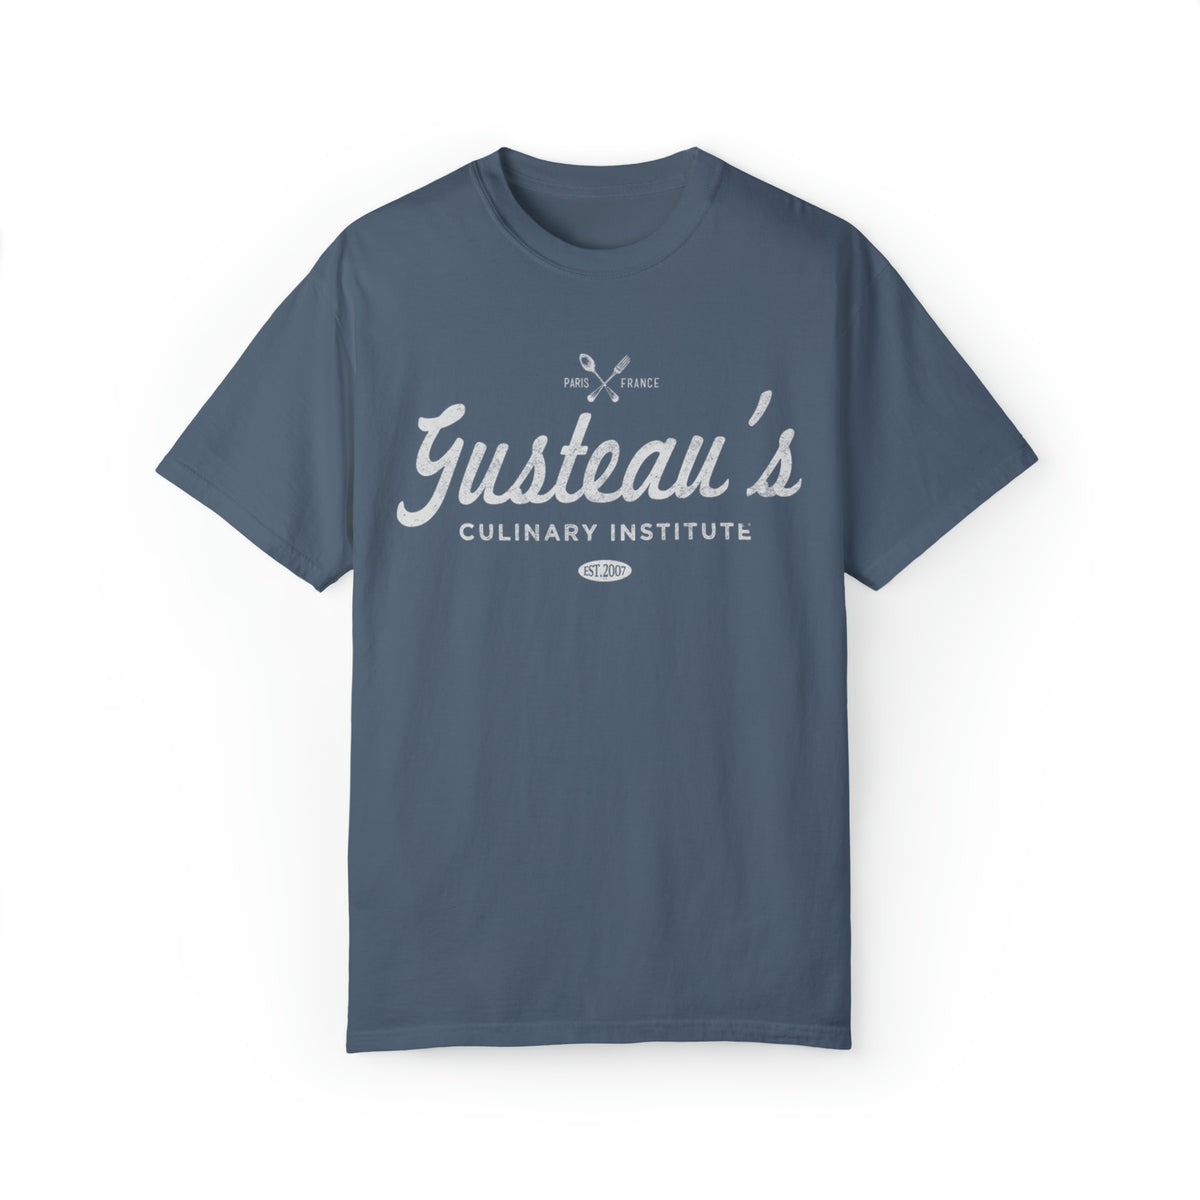 Gusteau’s Culinary Institute Comfort Colors Unisex Garment-Dyed T-shirt